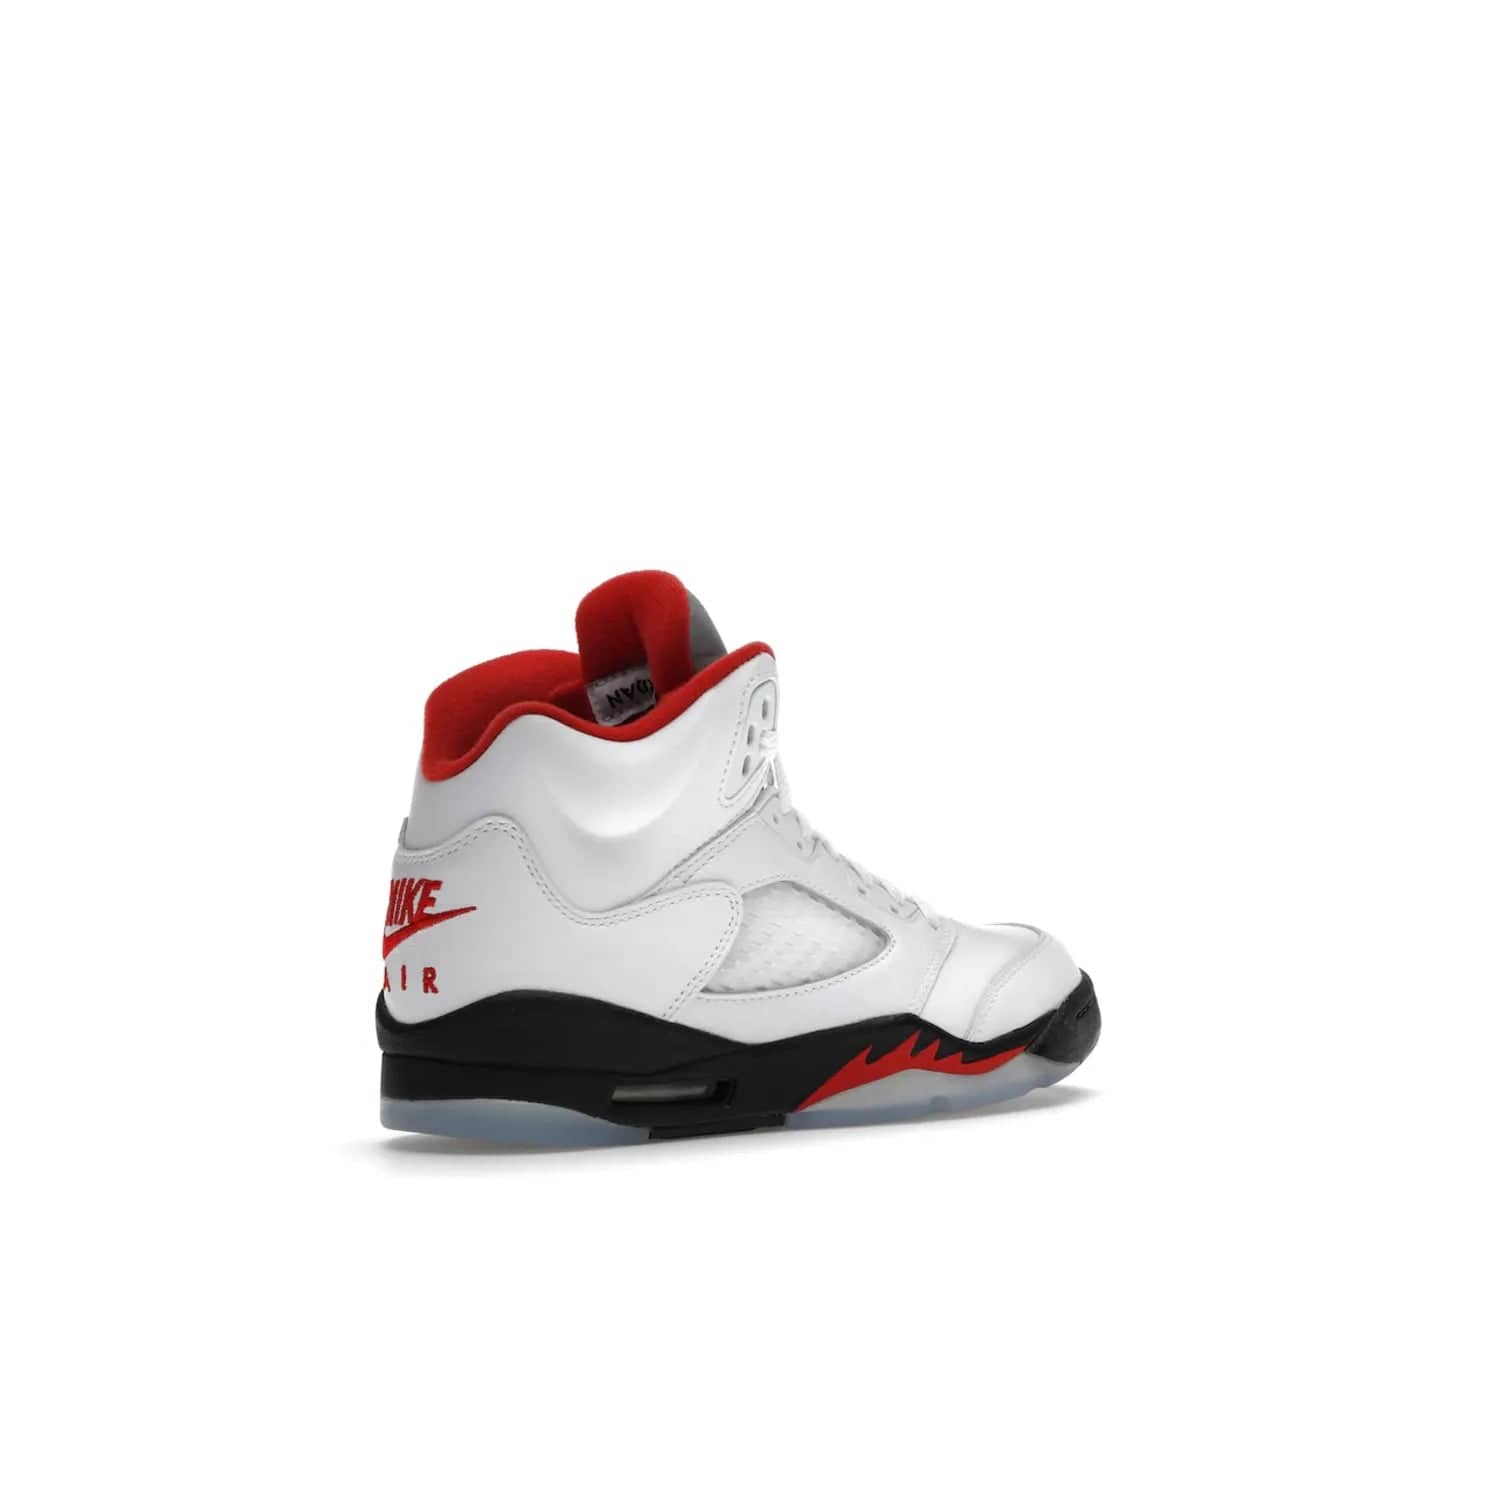 Jordan 5 Retro Fire Red Silver Tongue (2020) (GS) - Image 33 - Only at www.BallersClubKickz.com - A stylish option for any grade schooler. The Air Jordan 5 Retro Fire Red Silver Tongue 2020 GS features a combination of four hues, premium white leather, a clear mesh mid-upper and a reflective silver tongue. An icy translucent blue outsole completes the look. Available on May 2, $150.